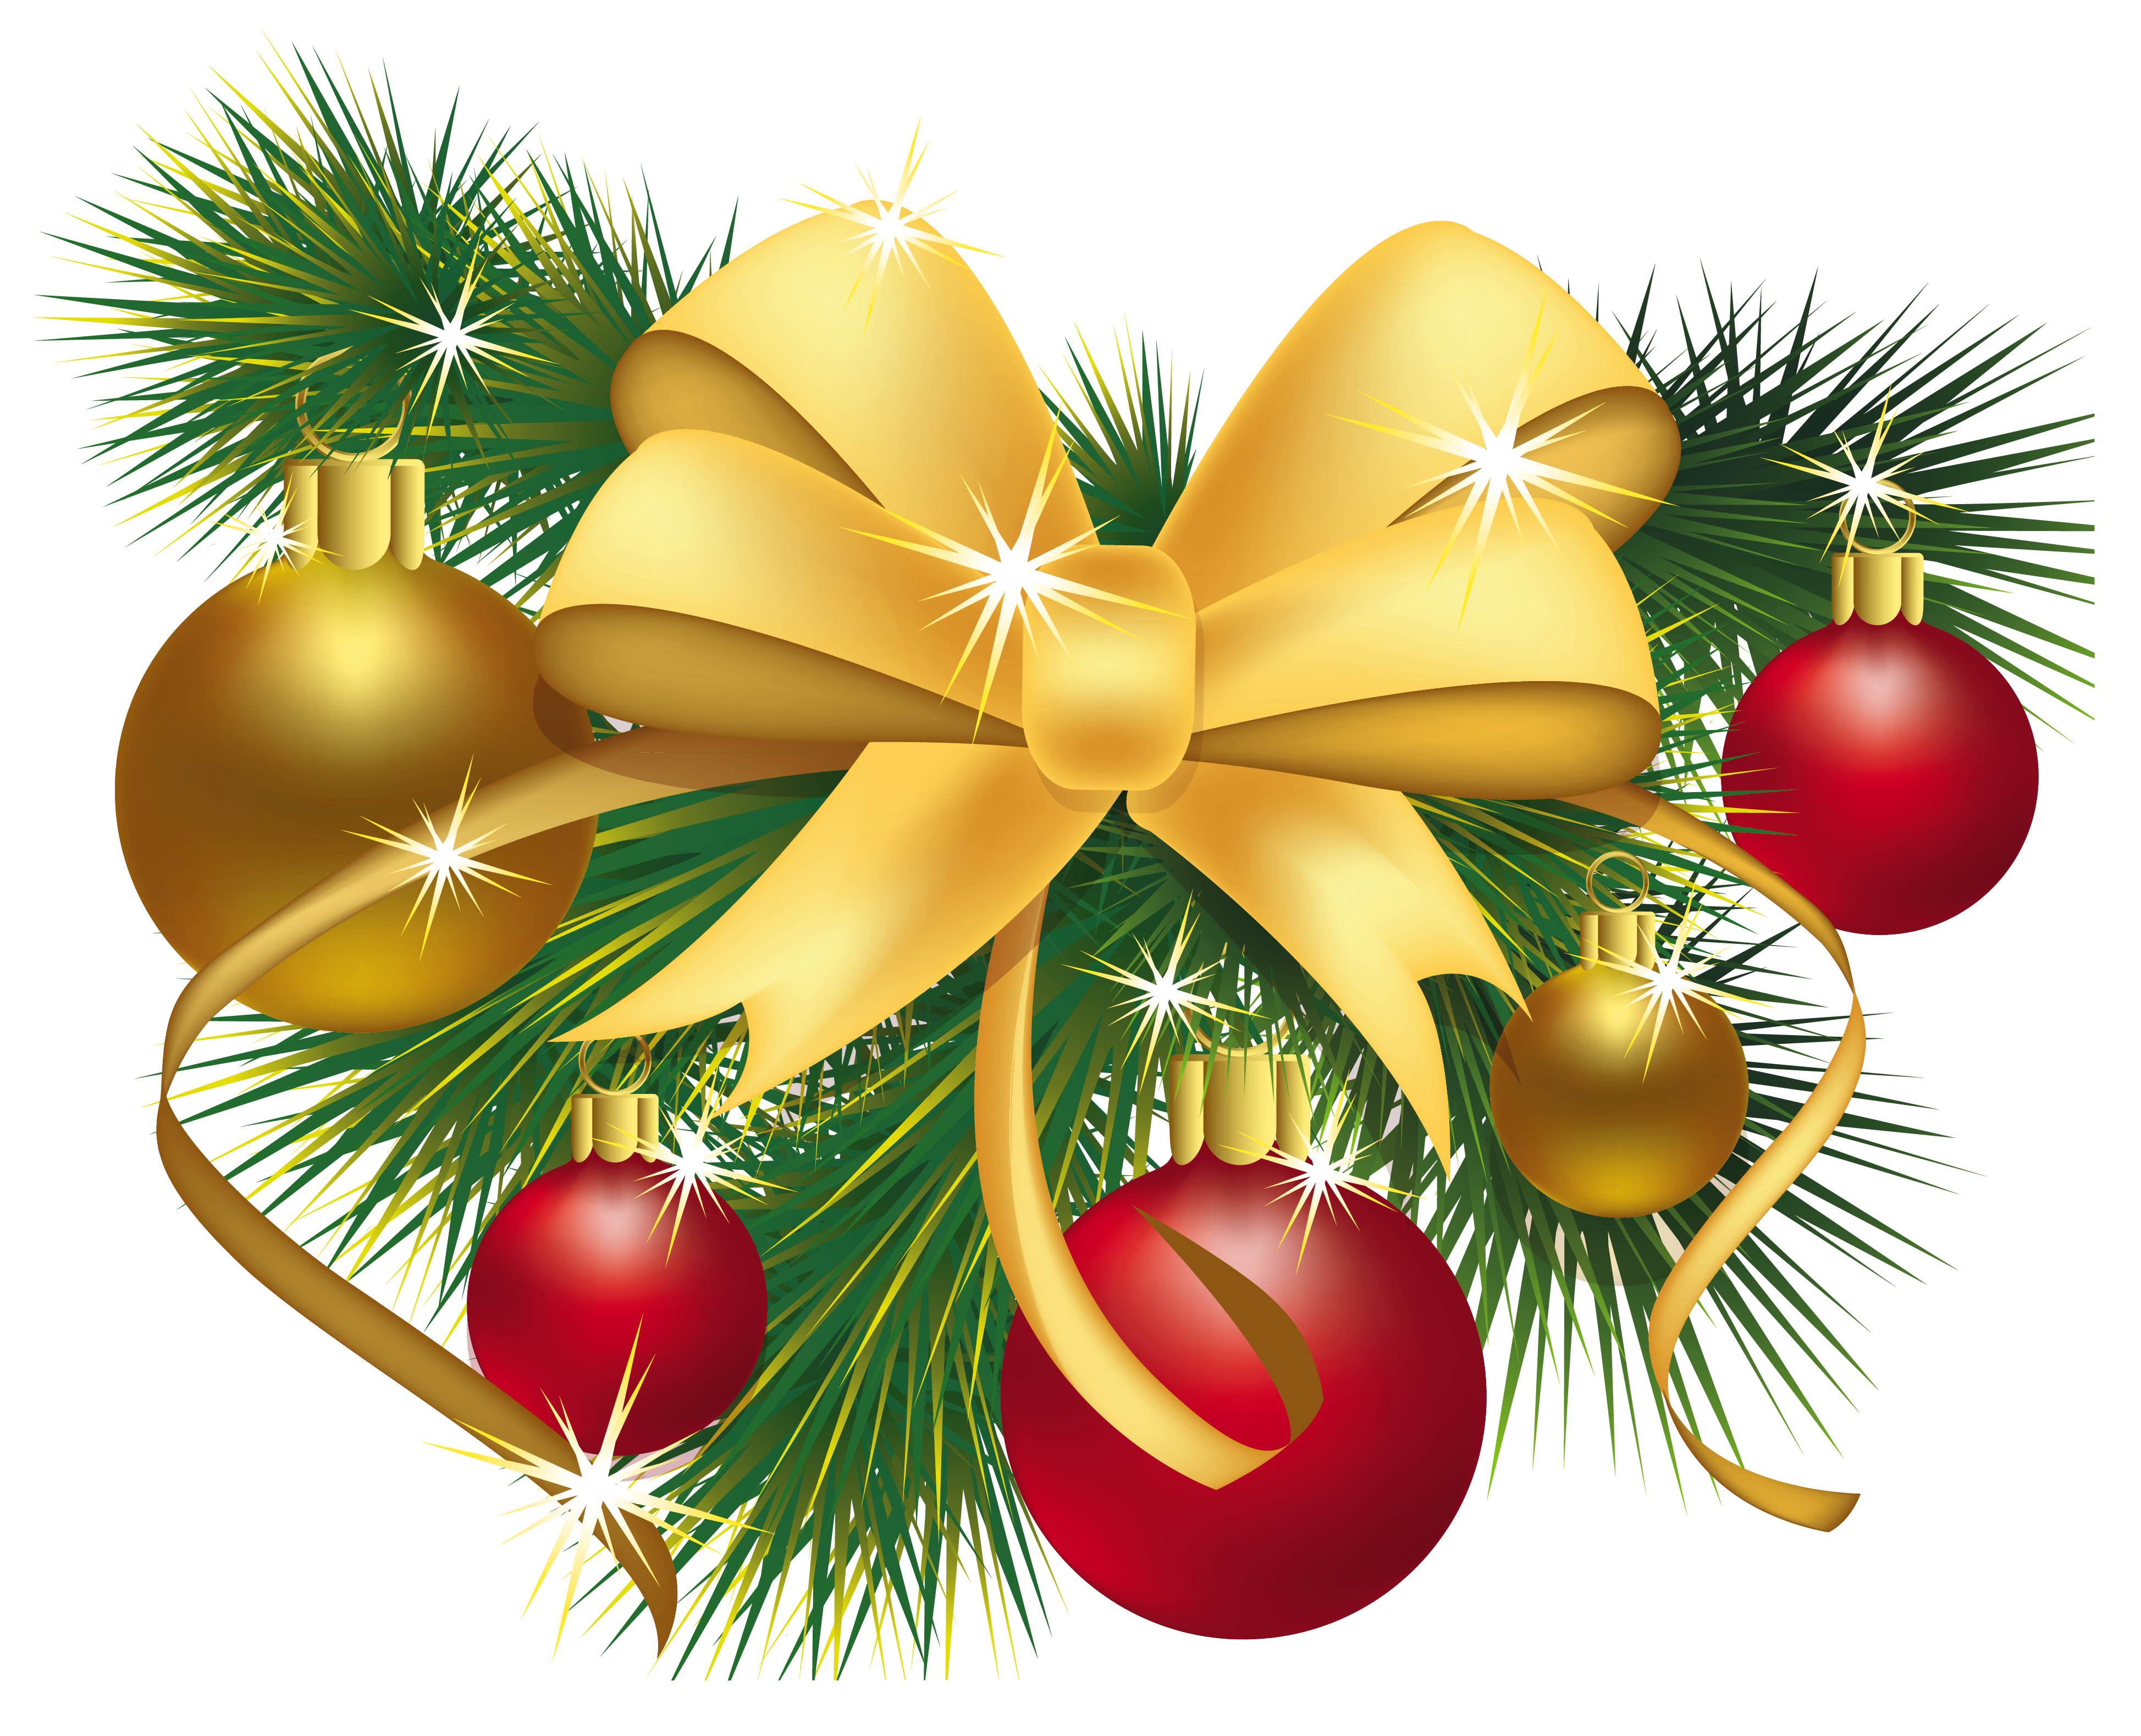 Transparent Christmas Decoration PNG Picture​ | Gallery Yopriceville - High-Quality Free Images and Transparent PNG Clipart